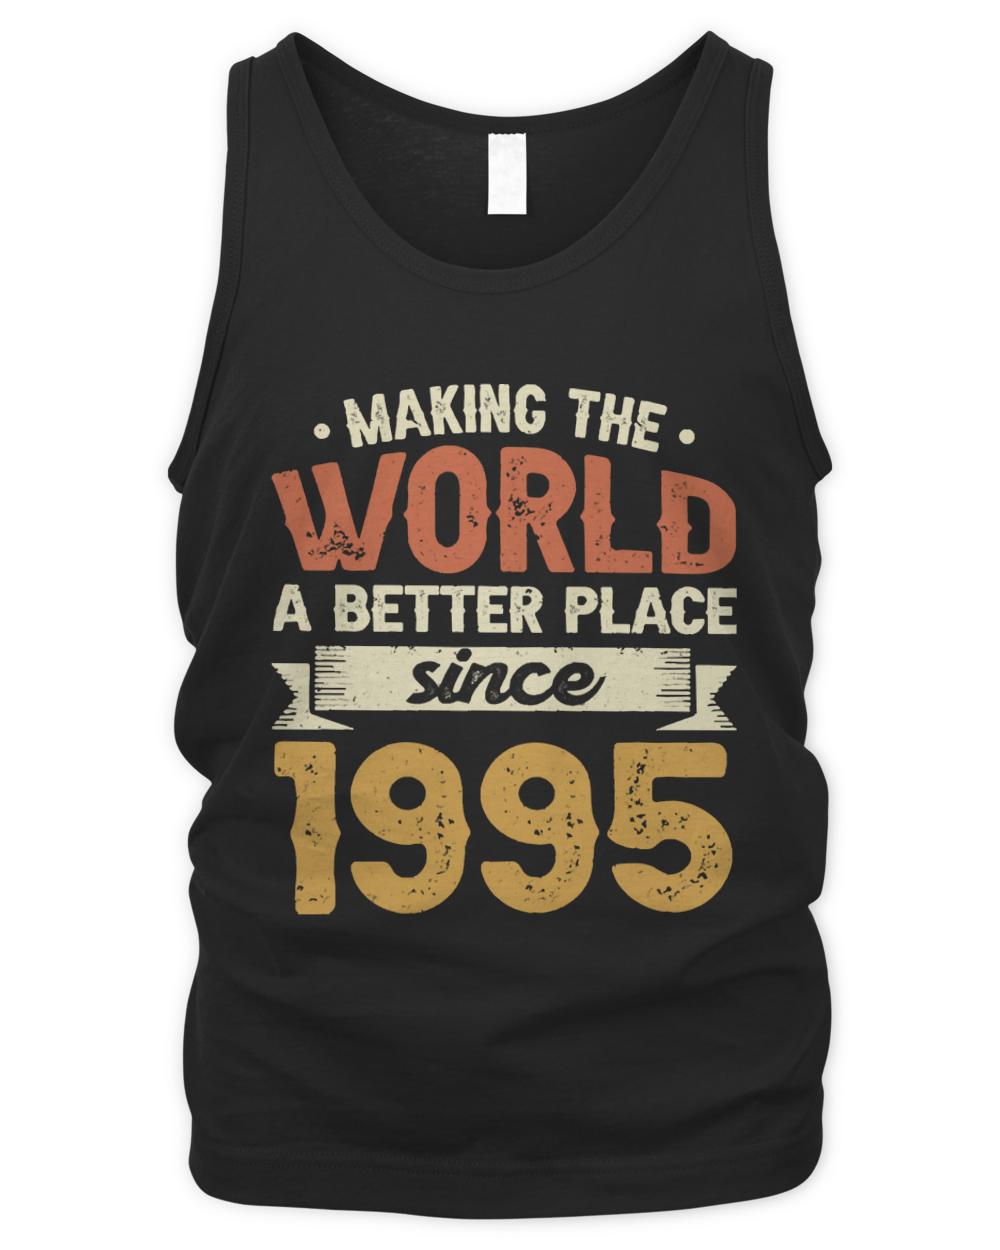 27th Birthday T-ShirtBirthday Making the world better place since 1995 T-Shirt (1)